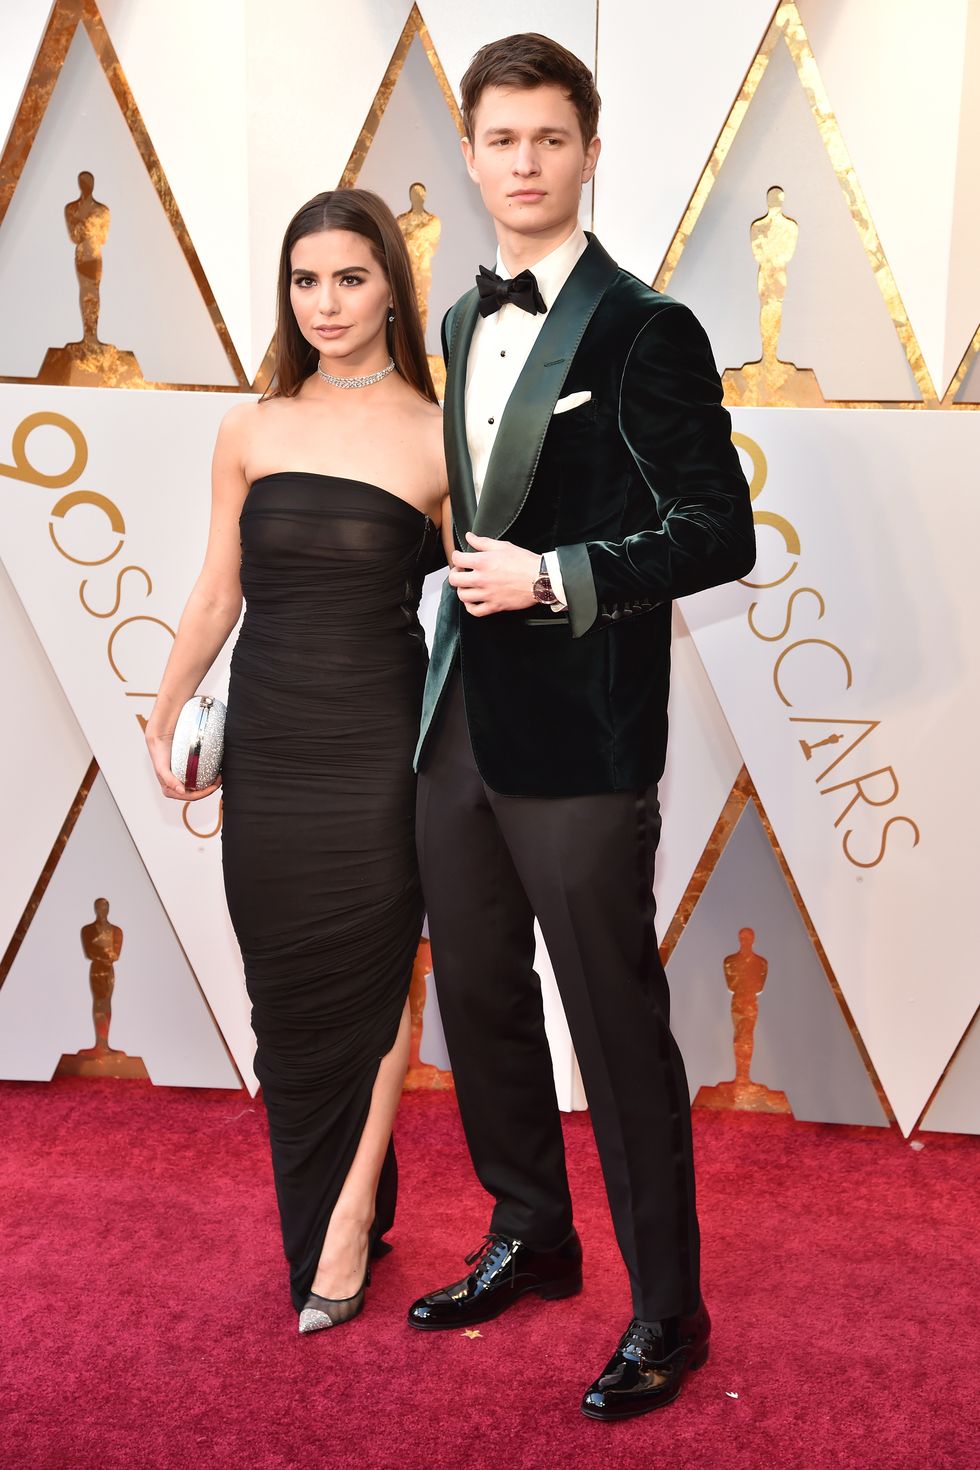 The Cutest Couple Moments at the 2021 Oscars